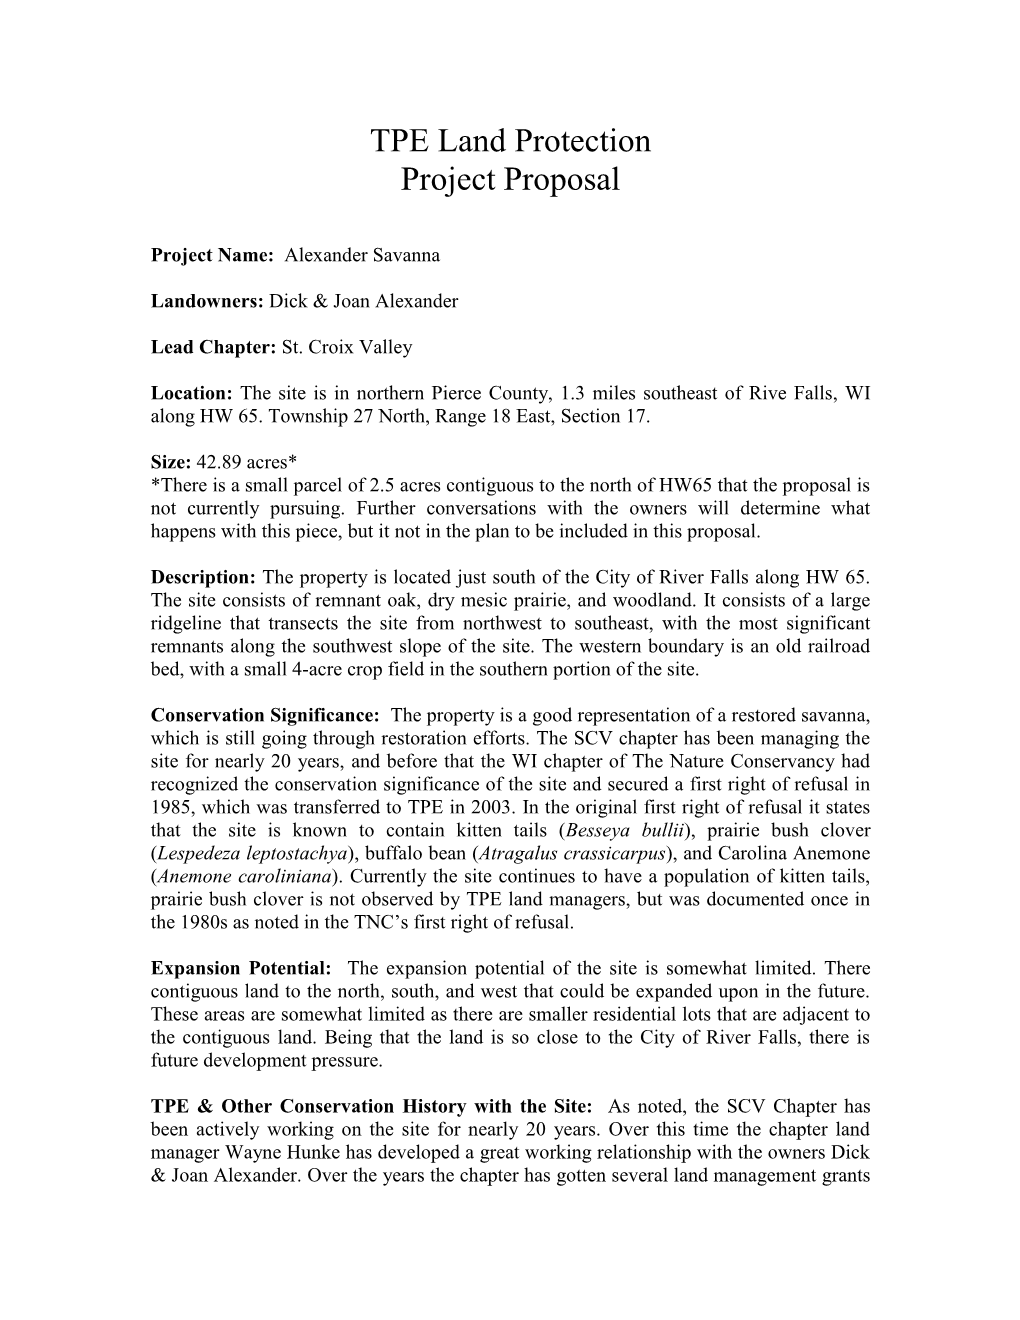 TPE Land Protection Project Proposal